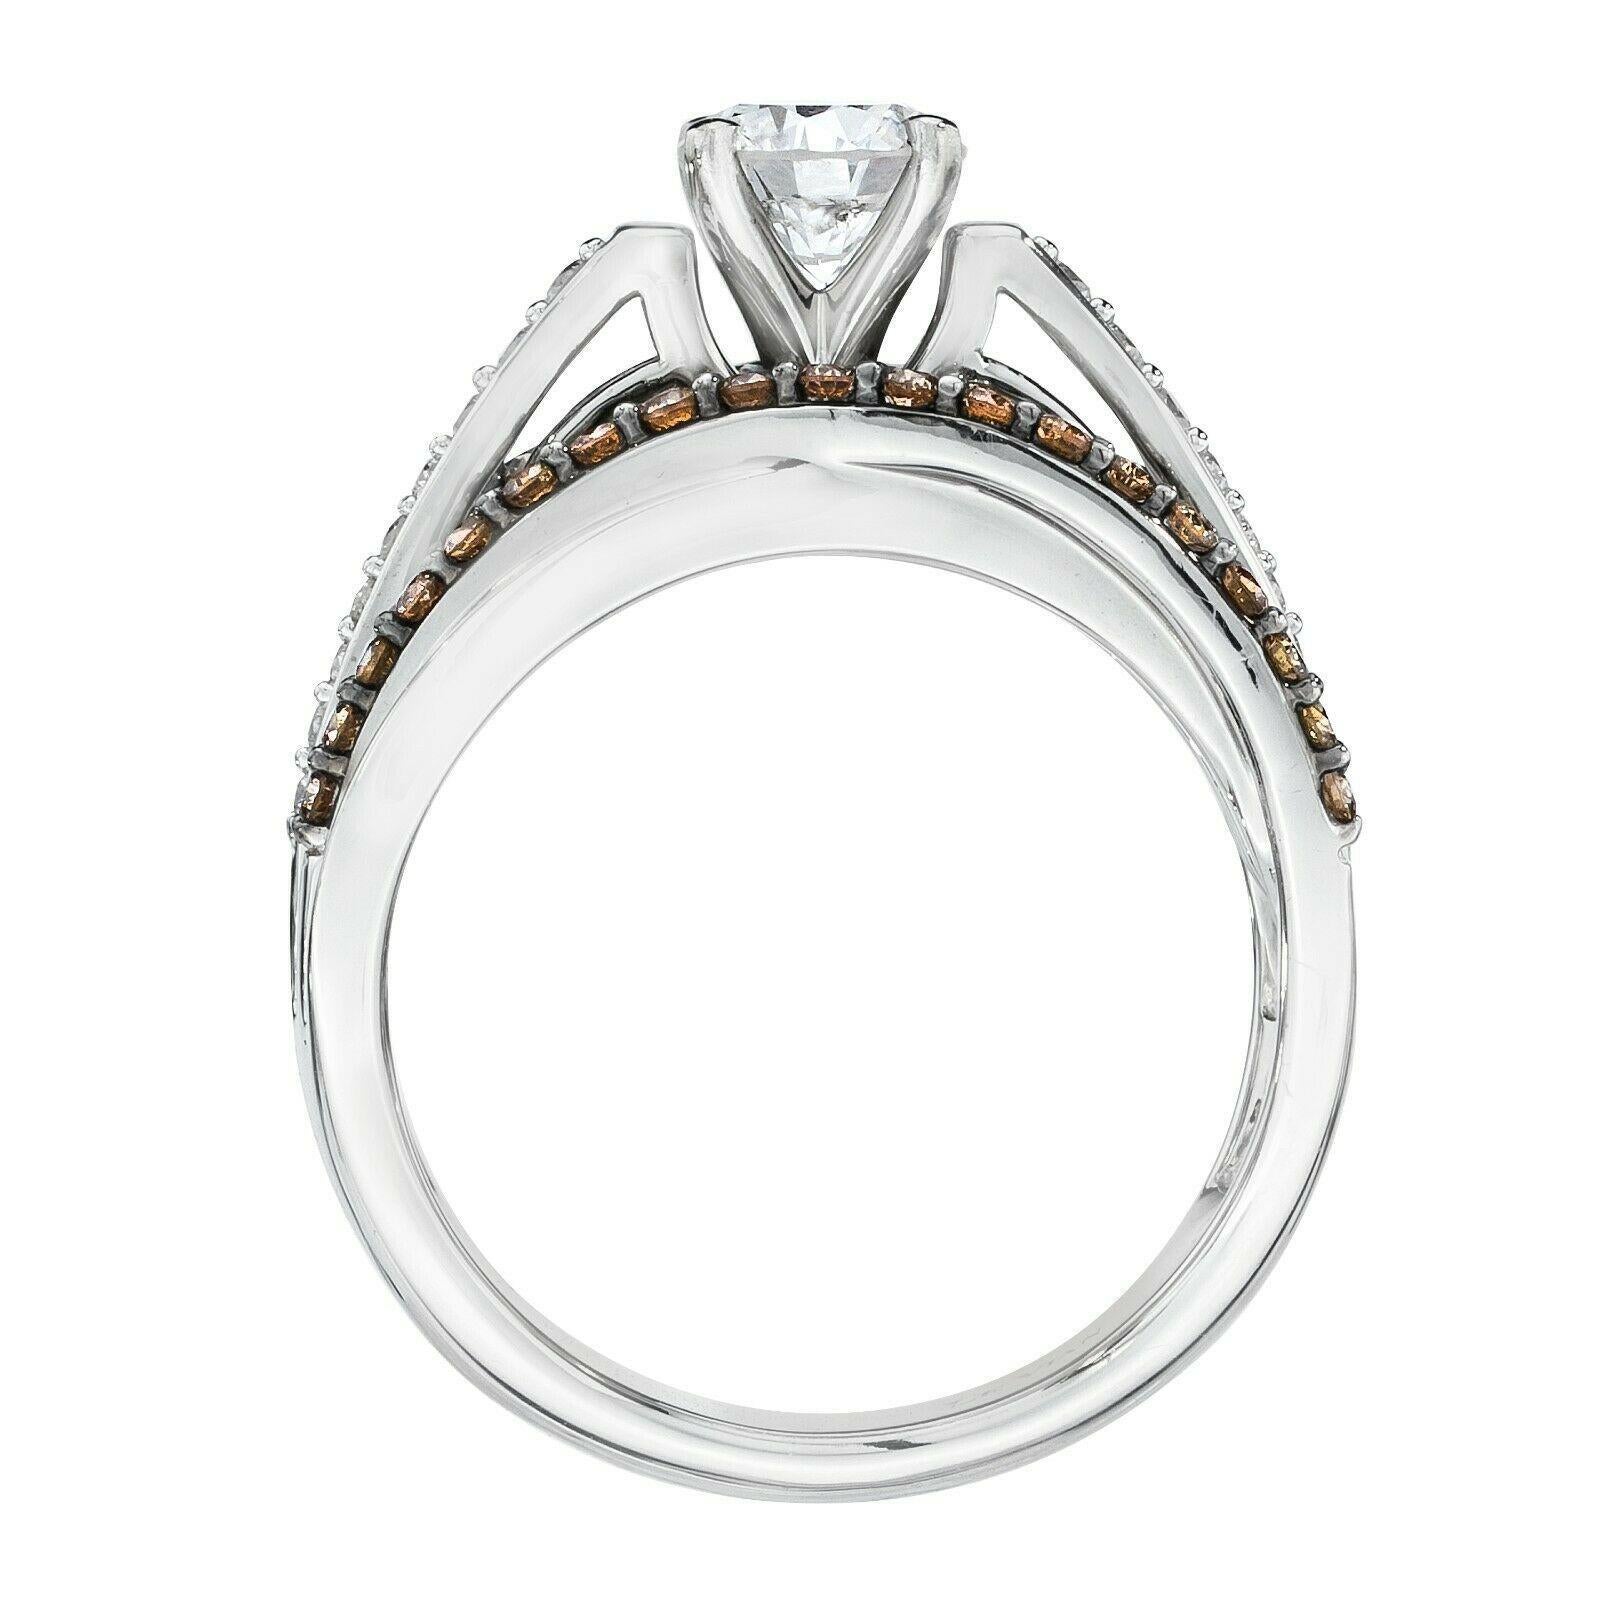 LeVian 14K White Gold Round Chocolate Brown Diamond Cocktail Bridal Wedding Ring In New Condition For Sale In Great Neck, NY